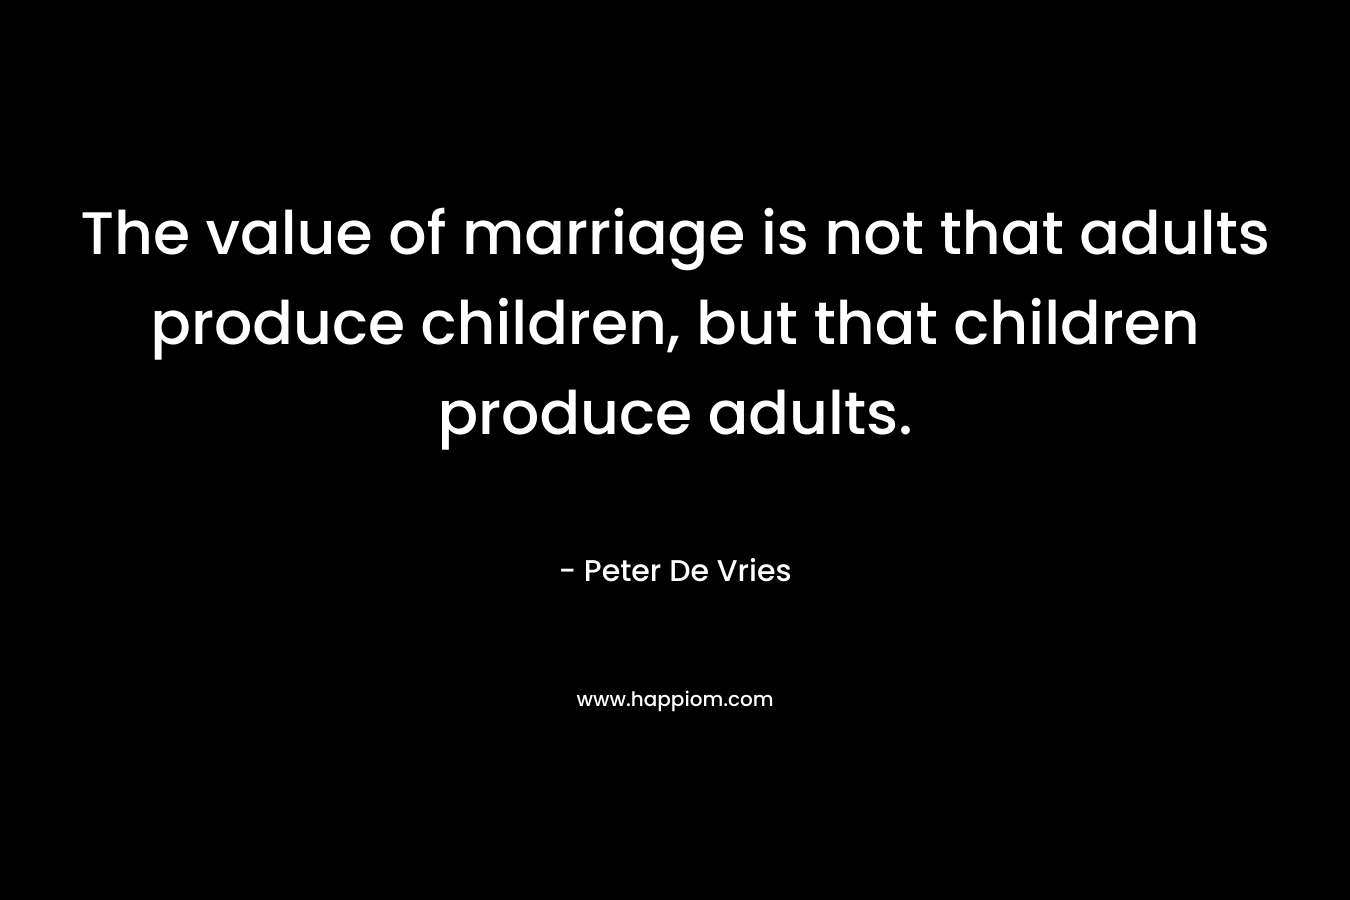 The value of marriage is not that adults produce children, but that children produce adults.